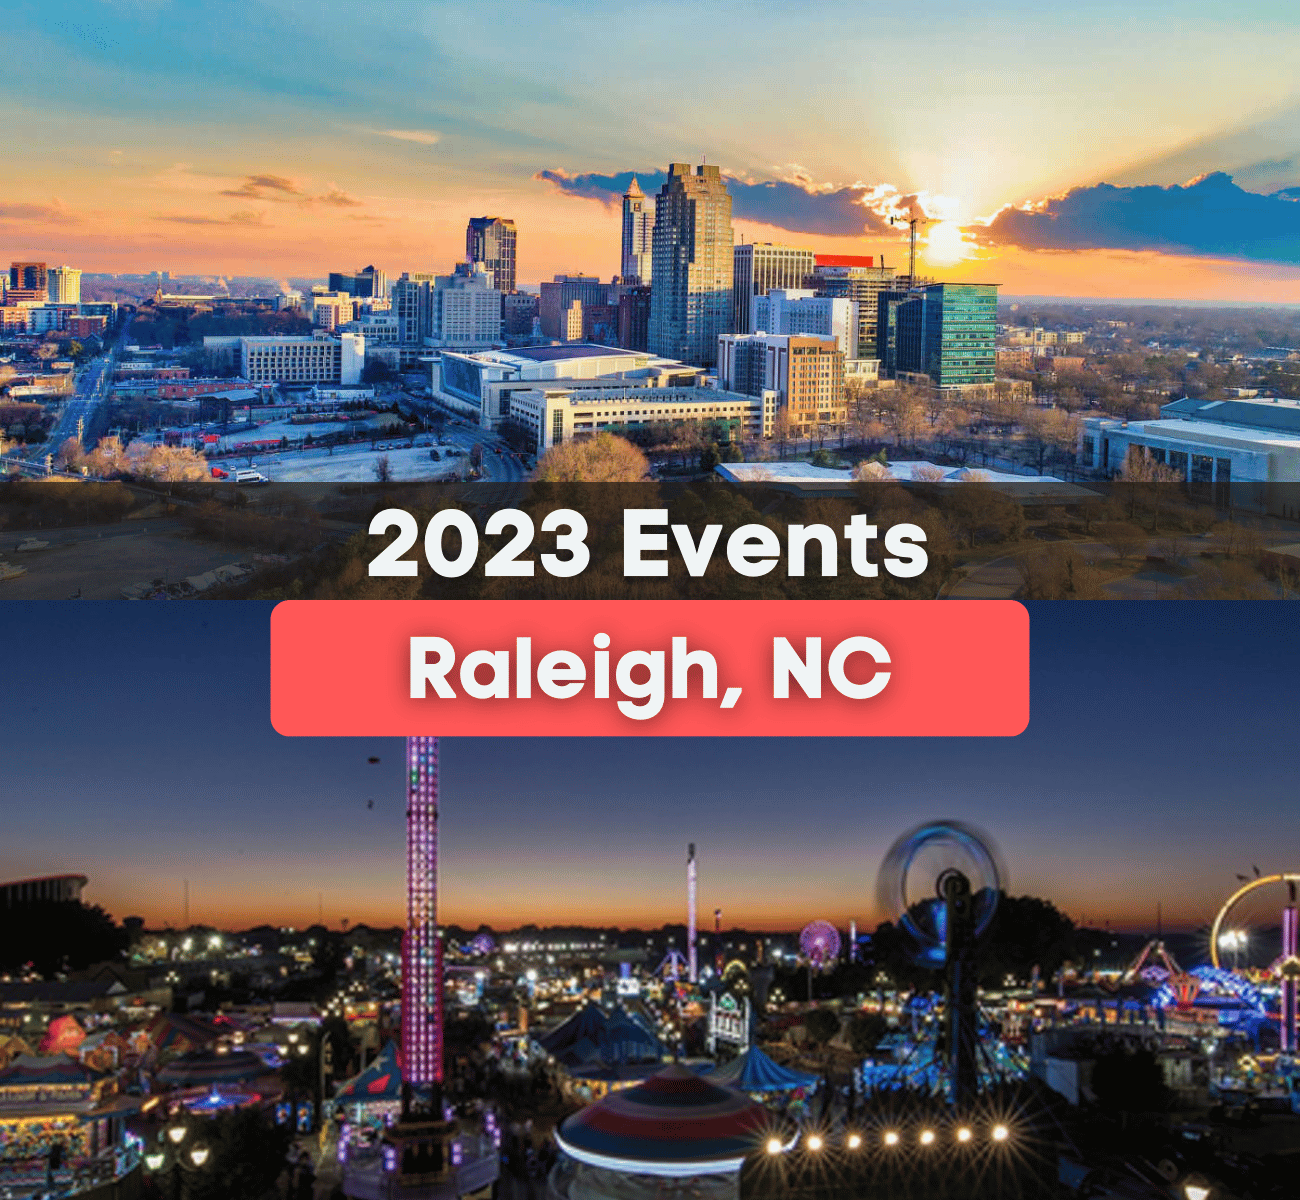 27 Fun Events In Raleigh, NC In 2023